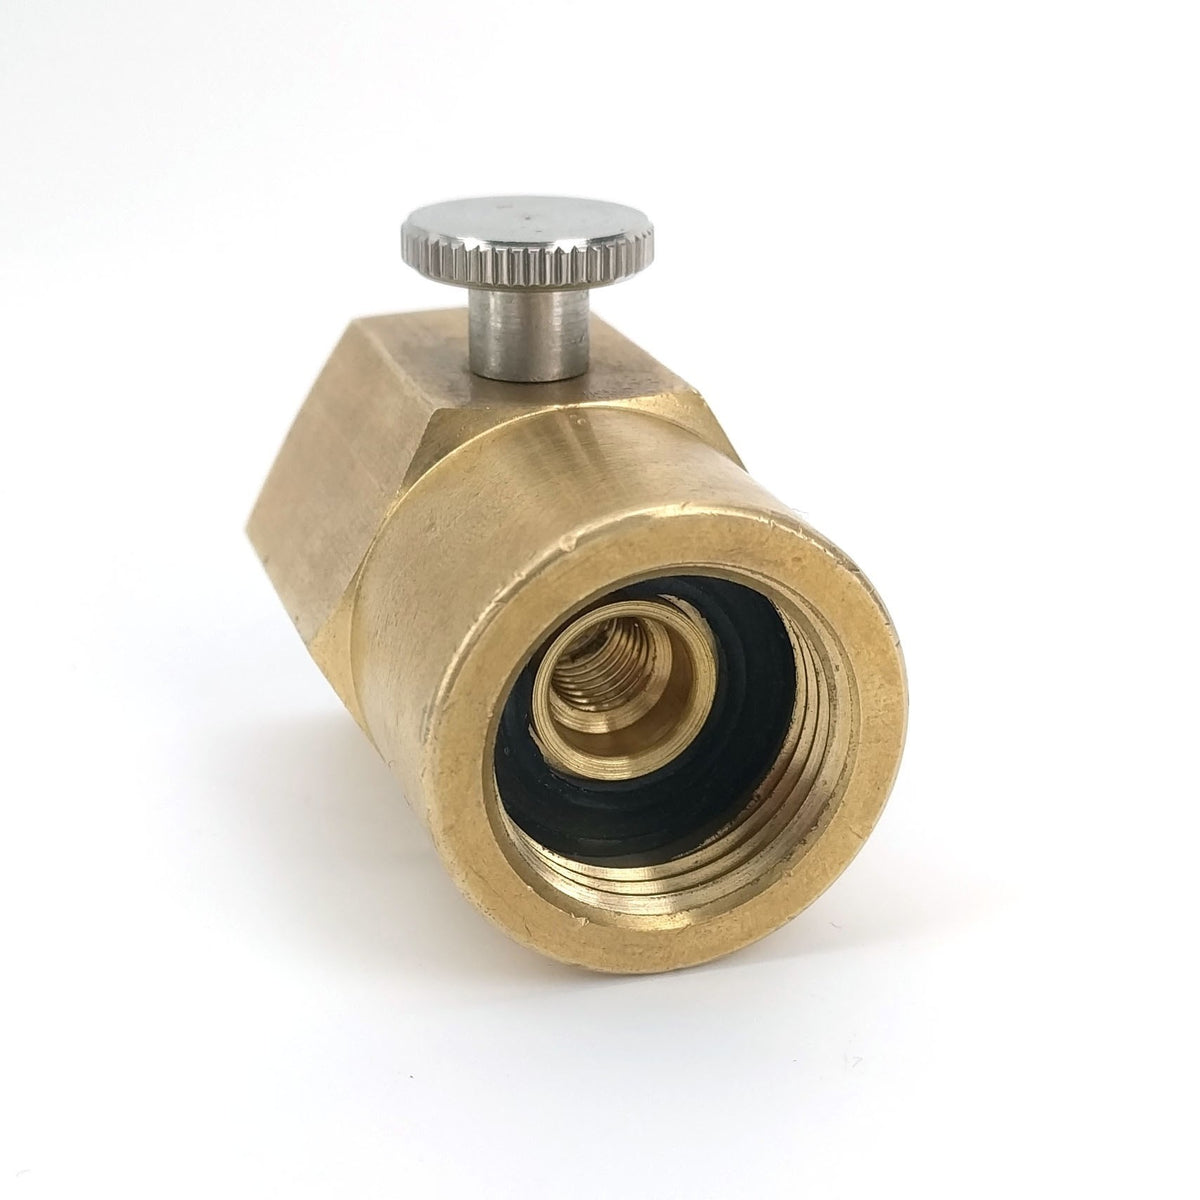 SodaStream Cylinder Filling Adapter with Bleed Valve - All Things Fermented | Home Brew Shop NZ | Supplies | Equipment